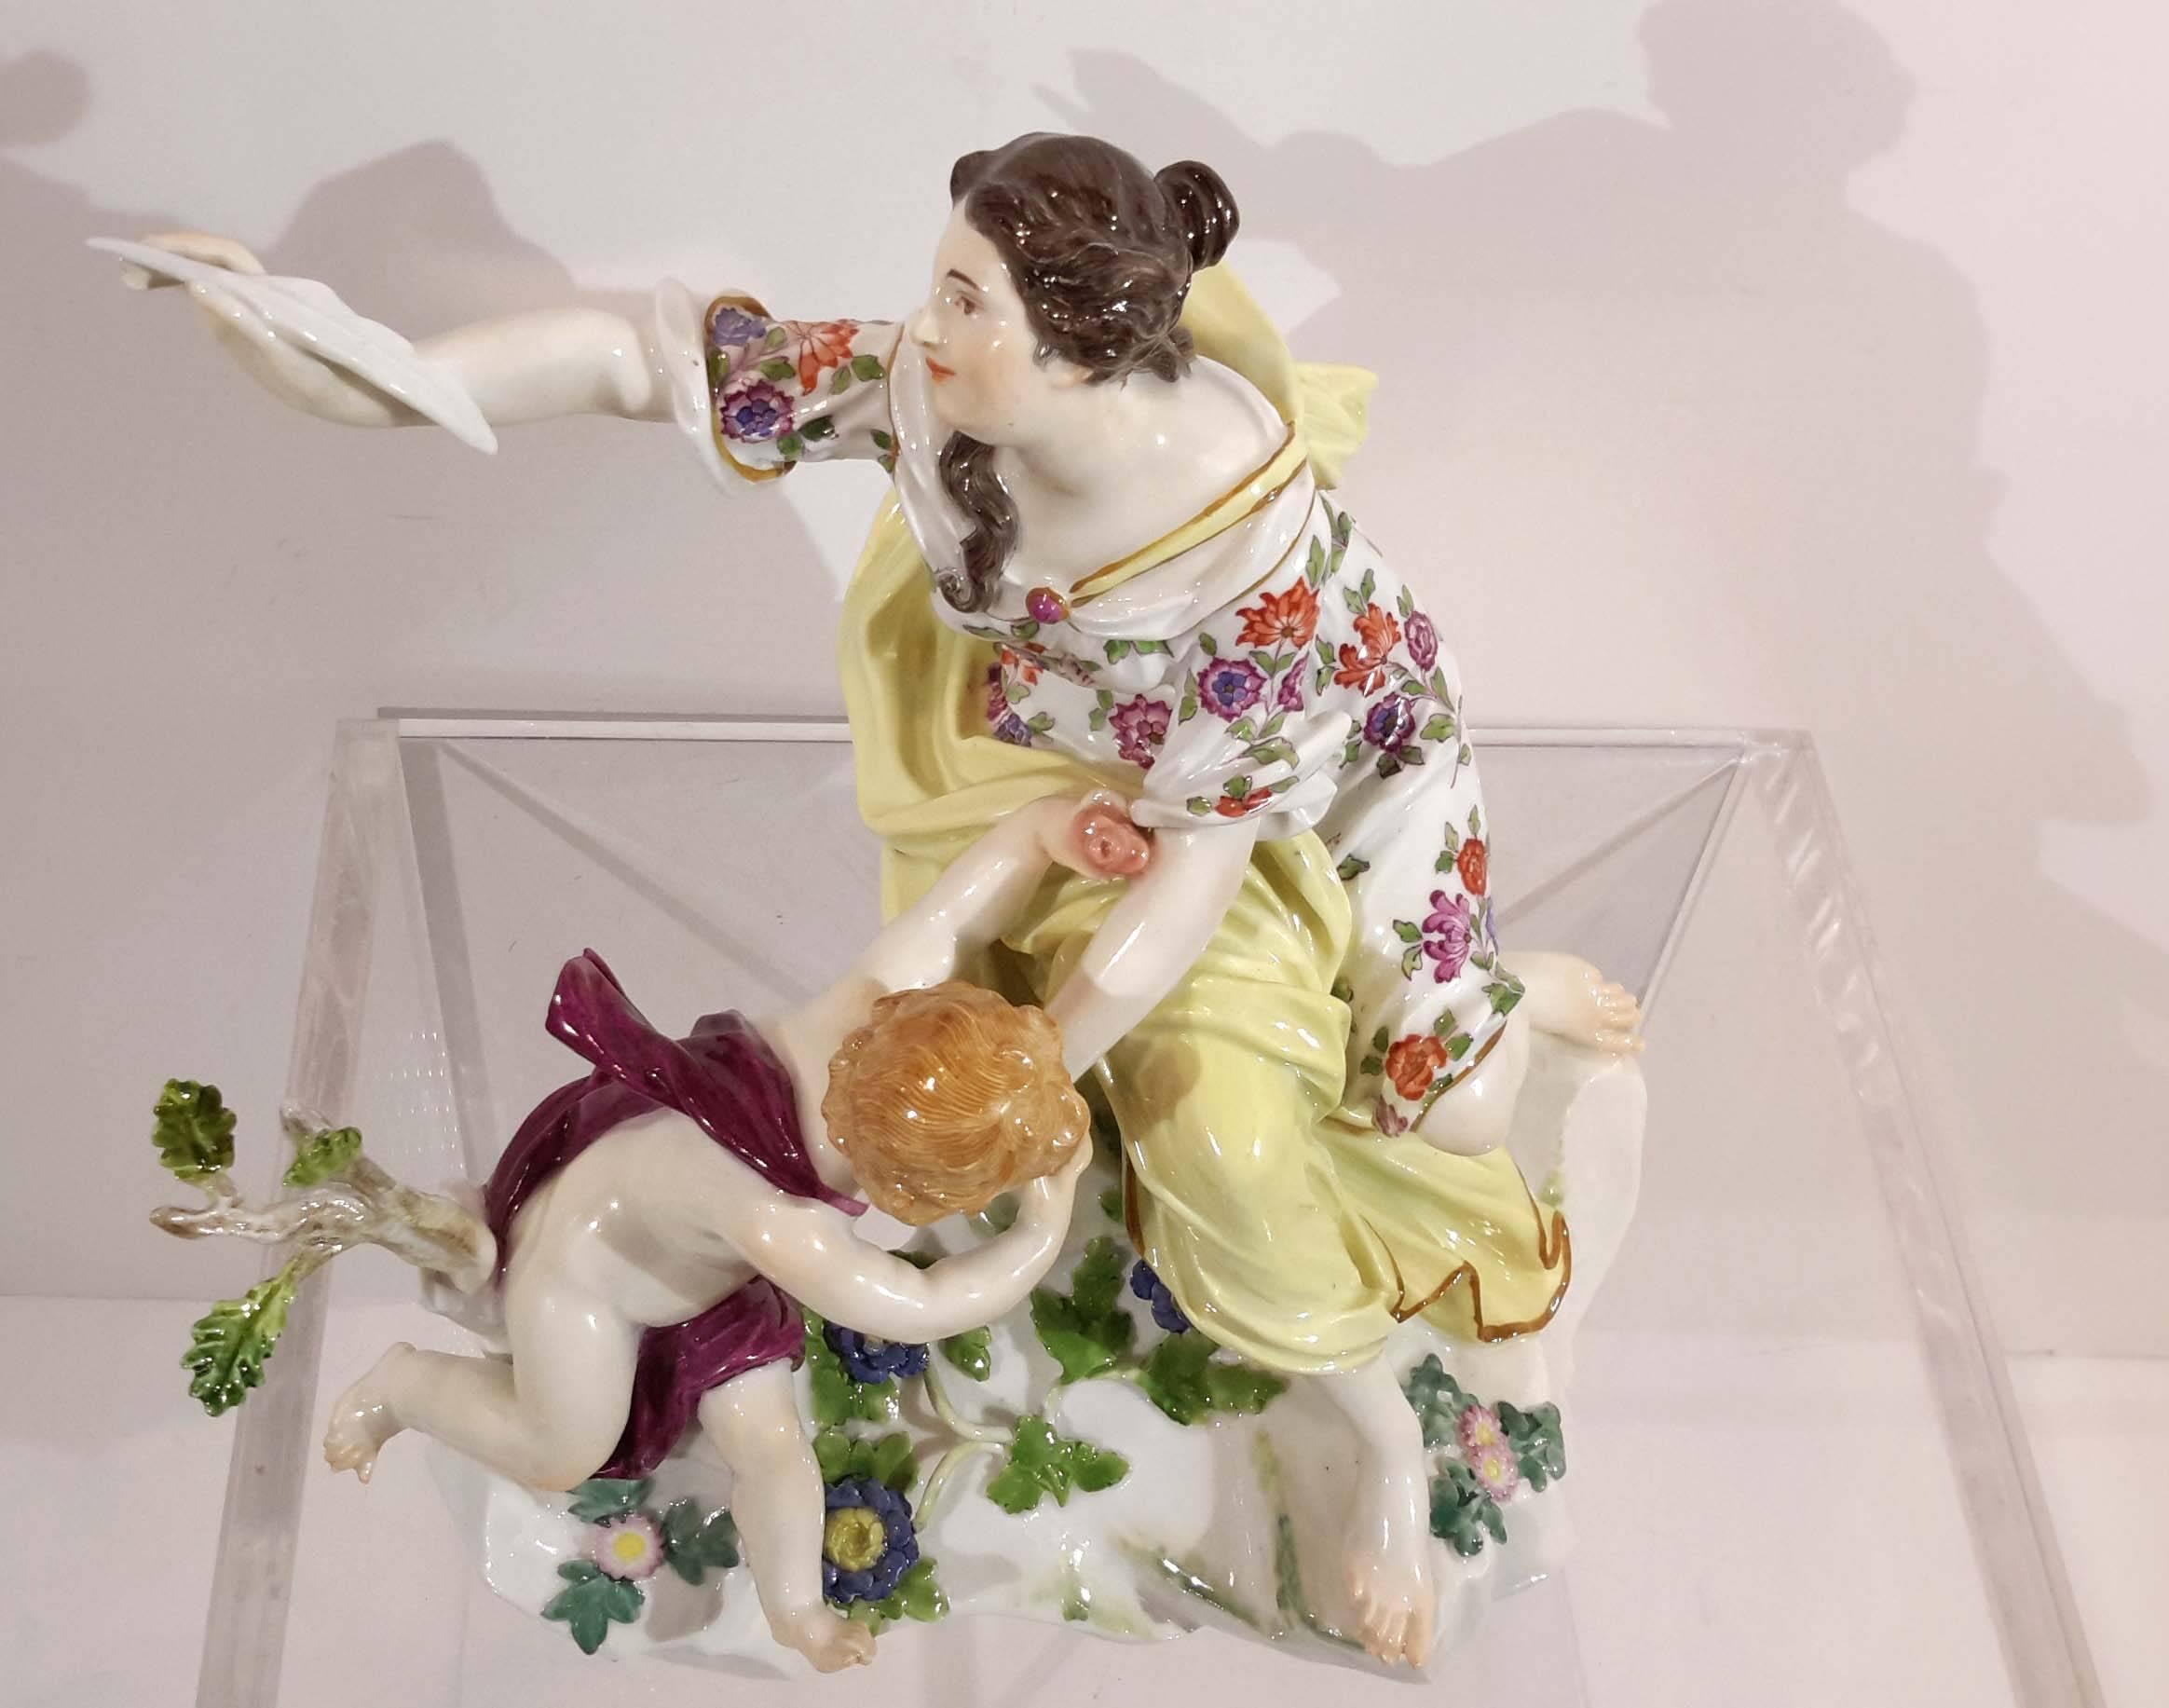 First quality Meissen. Underglazed blue crossed swords mark,
depicting an allegorical scene with a maiden holding a pen and a cherub kissing her left hand.